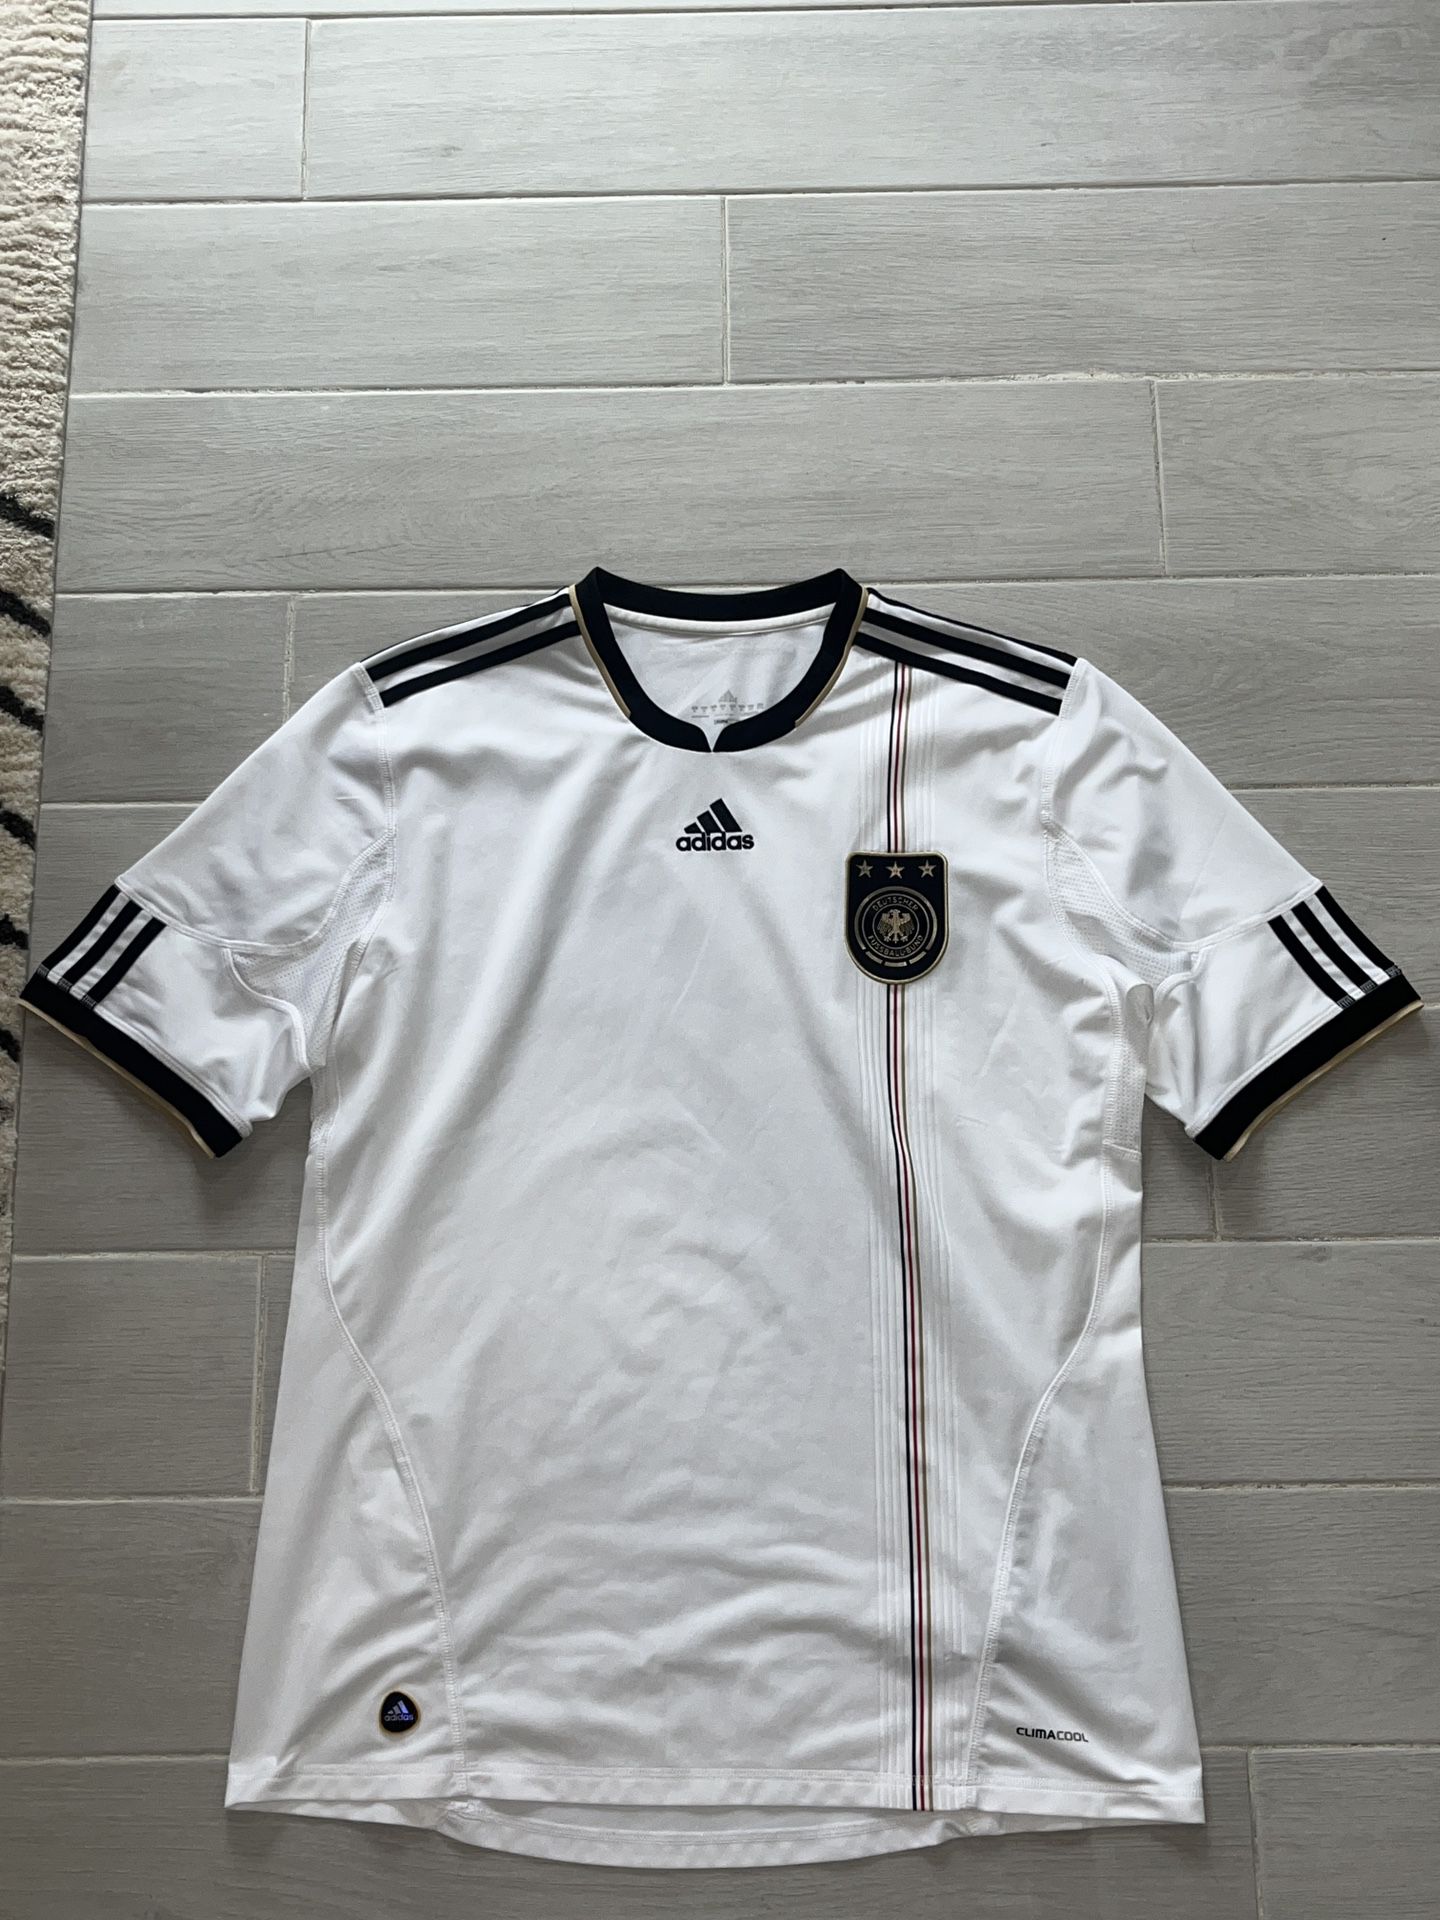 Germany Adidas 2010 World Cup football home jersey size XL P41477 soccer.